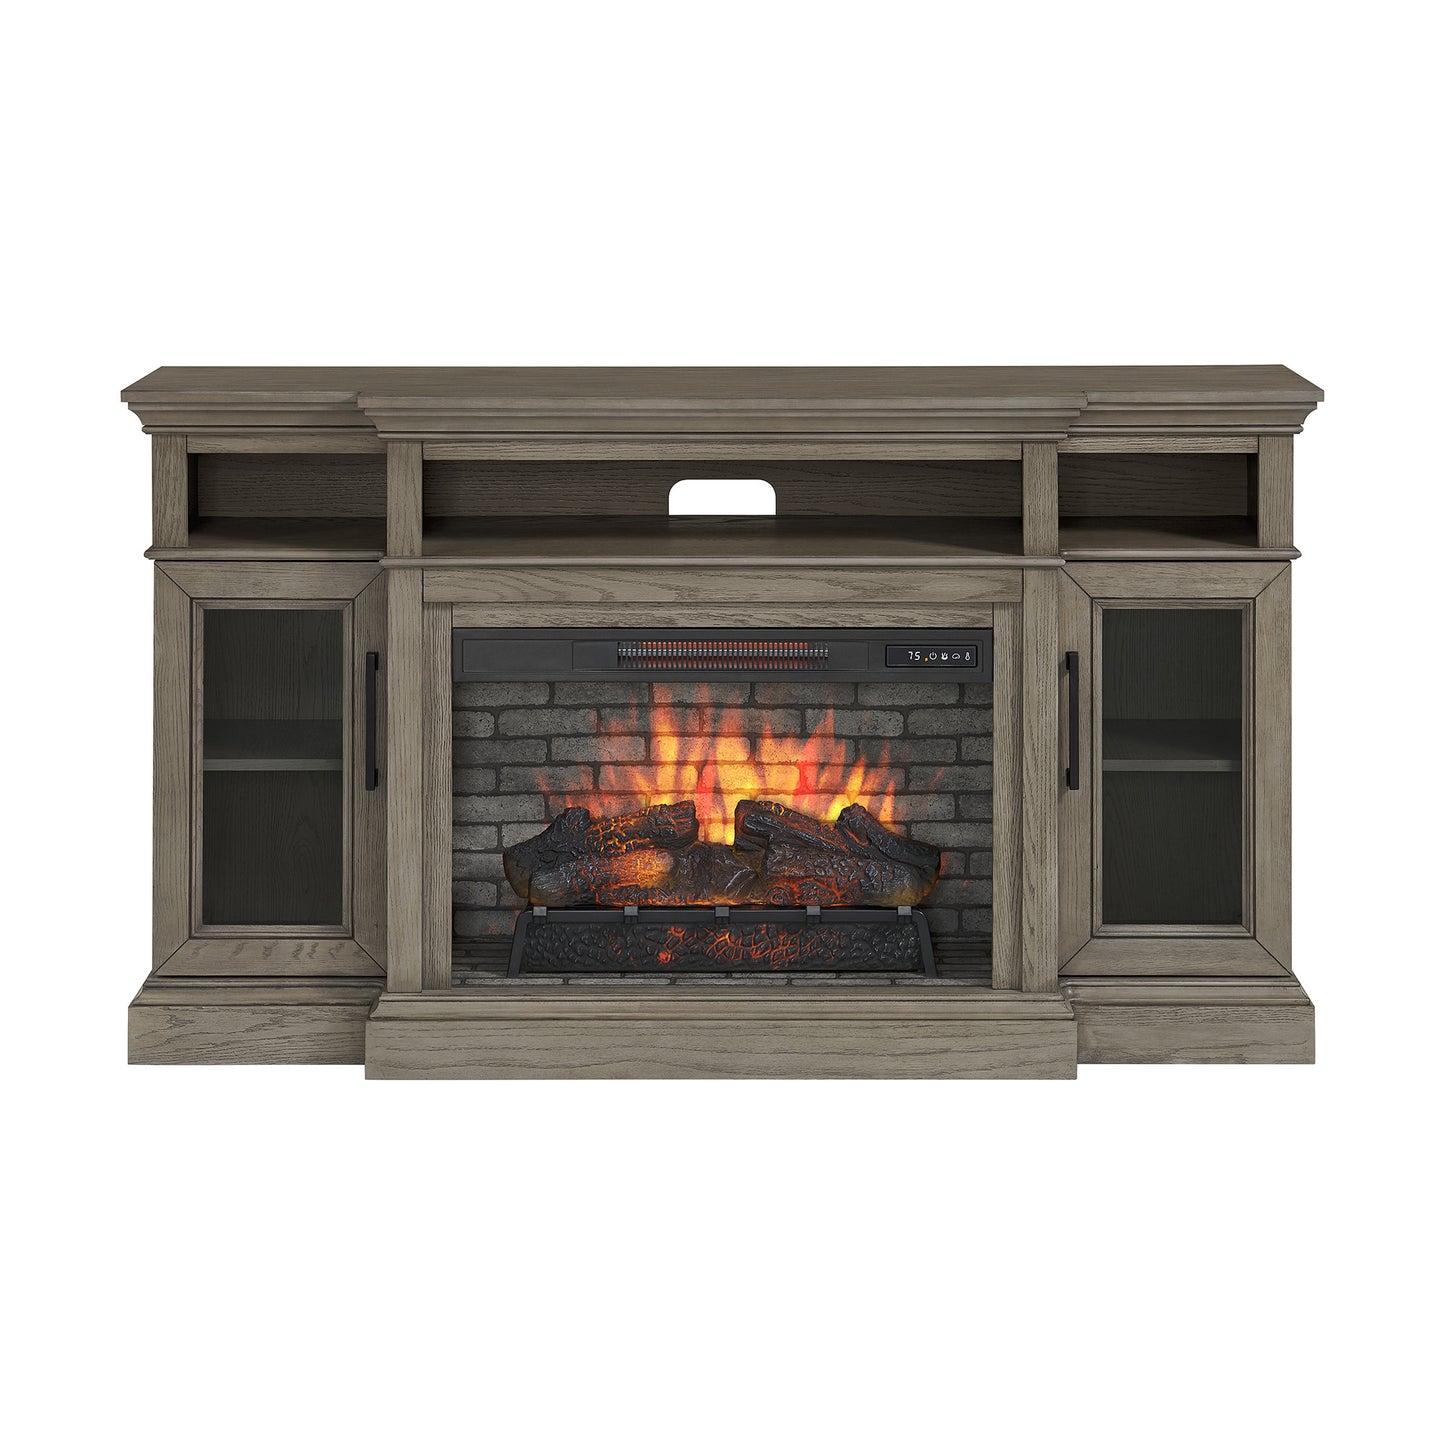 Westcliff 62 in Electric Fireplace In Rustic Taupe